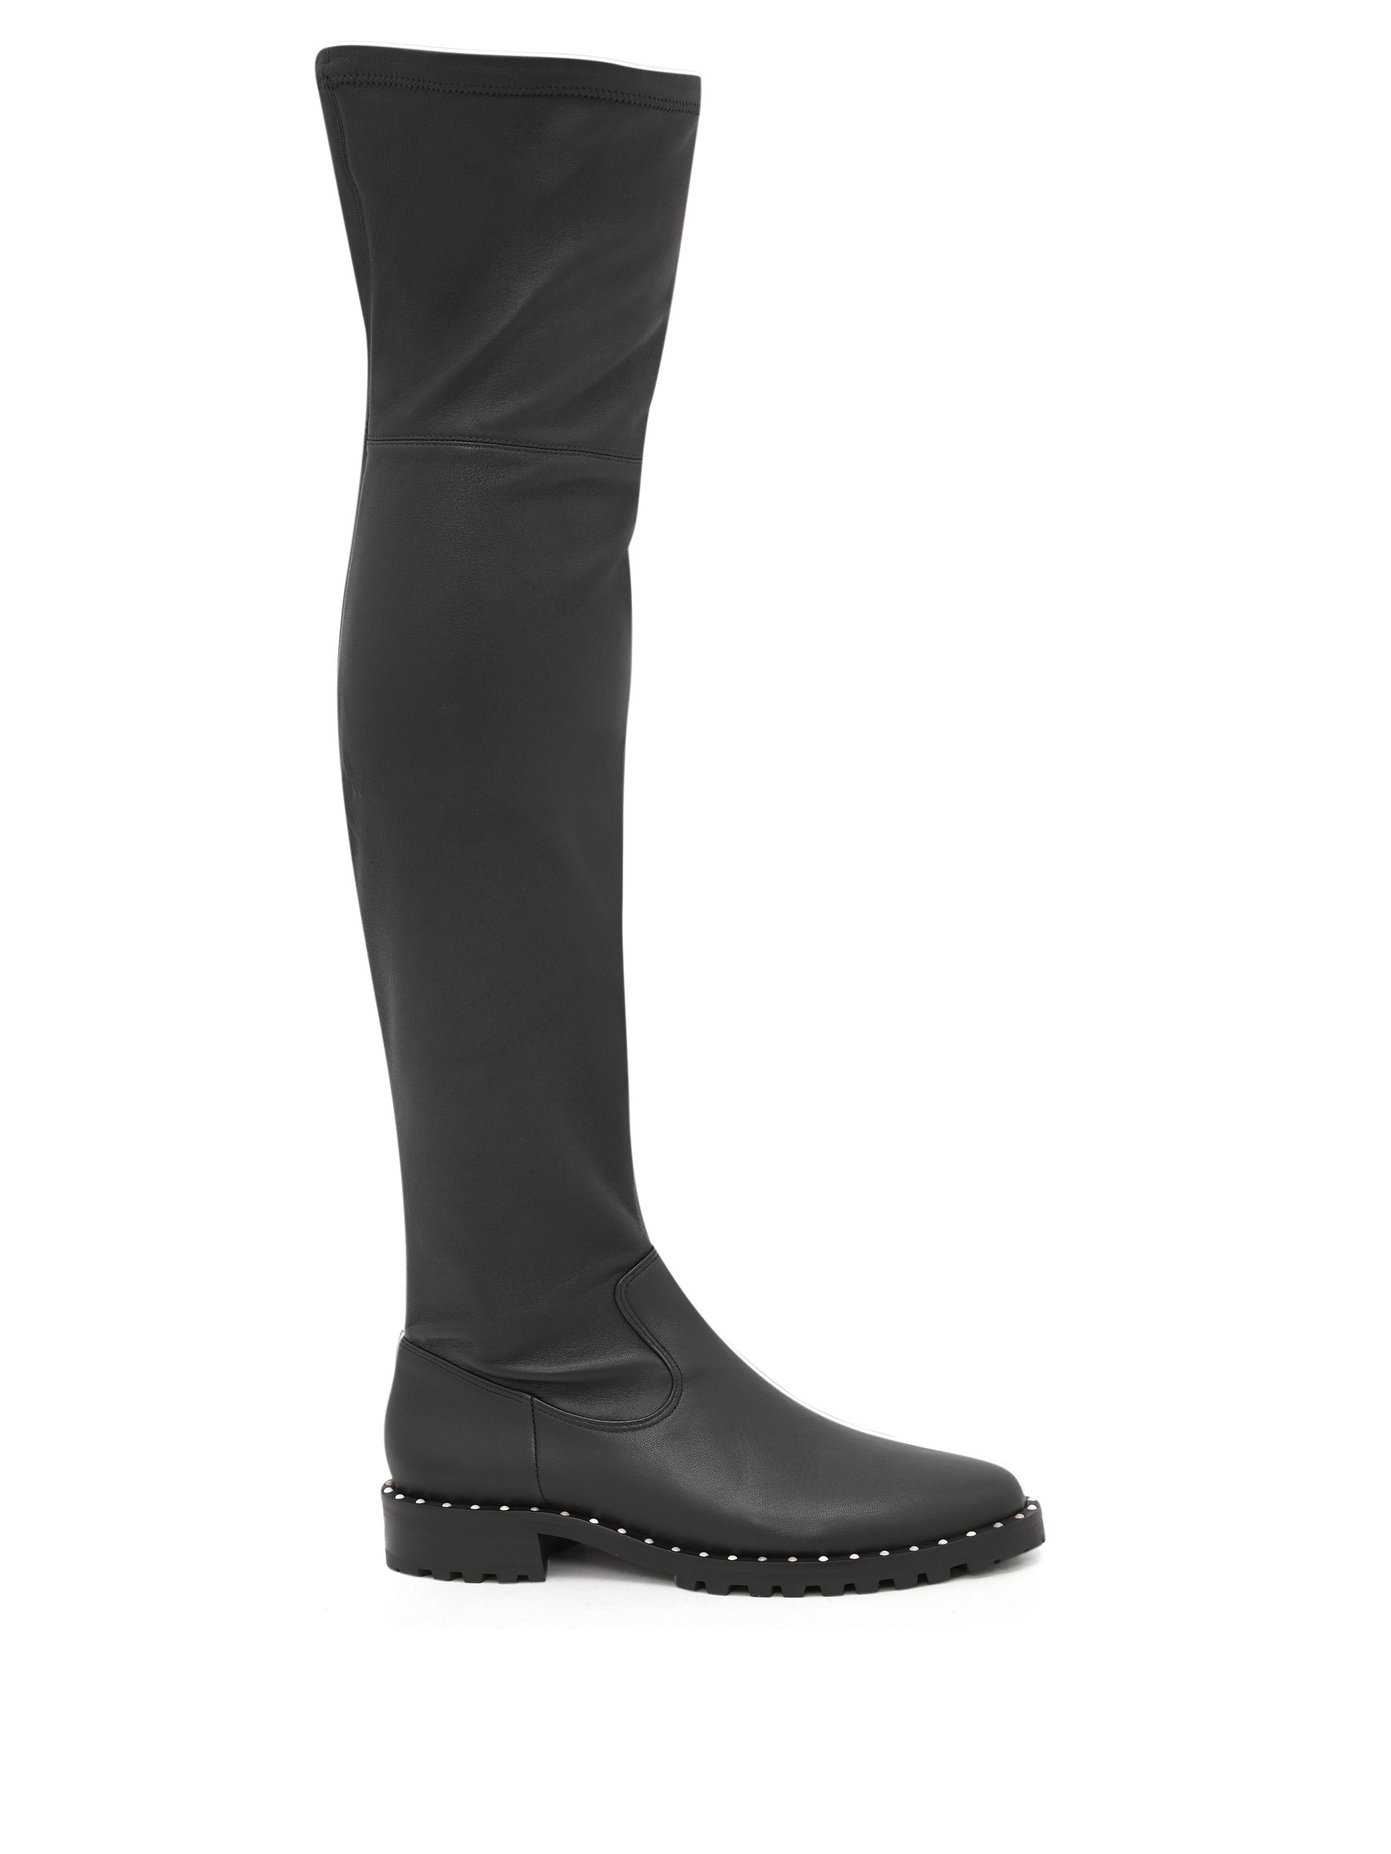 long over knee boots uk